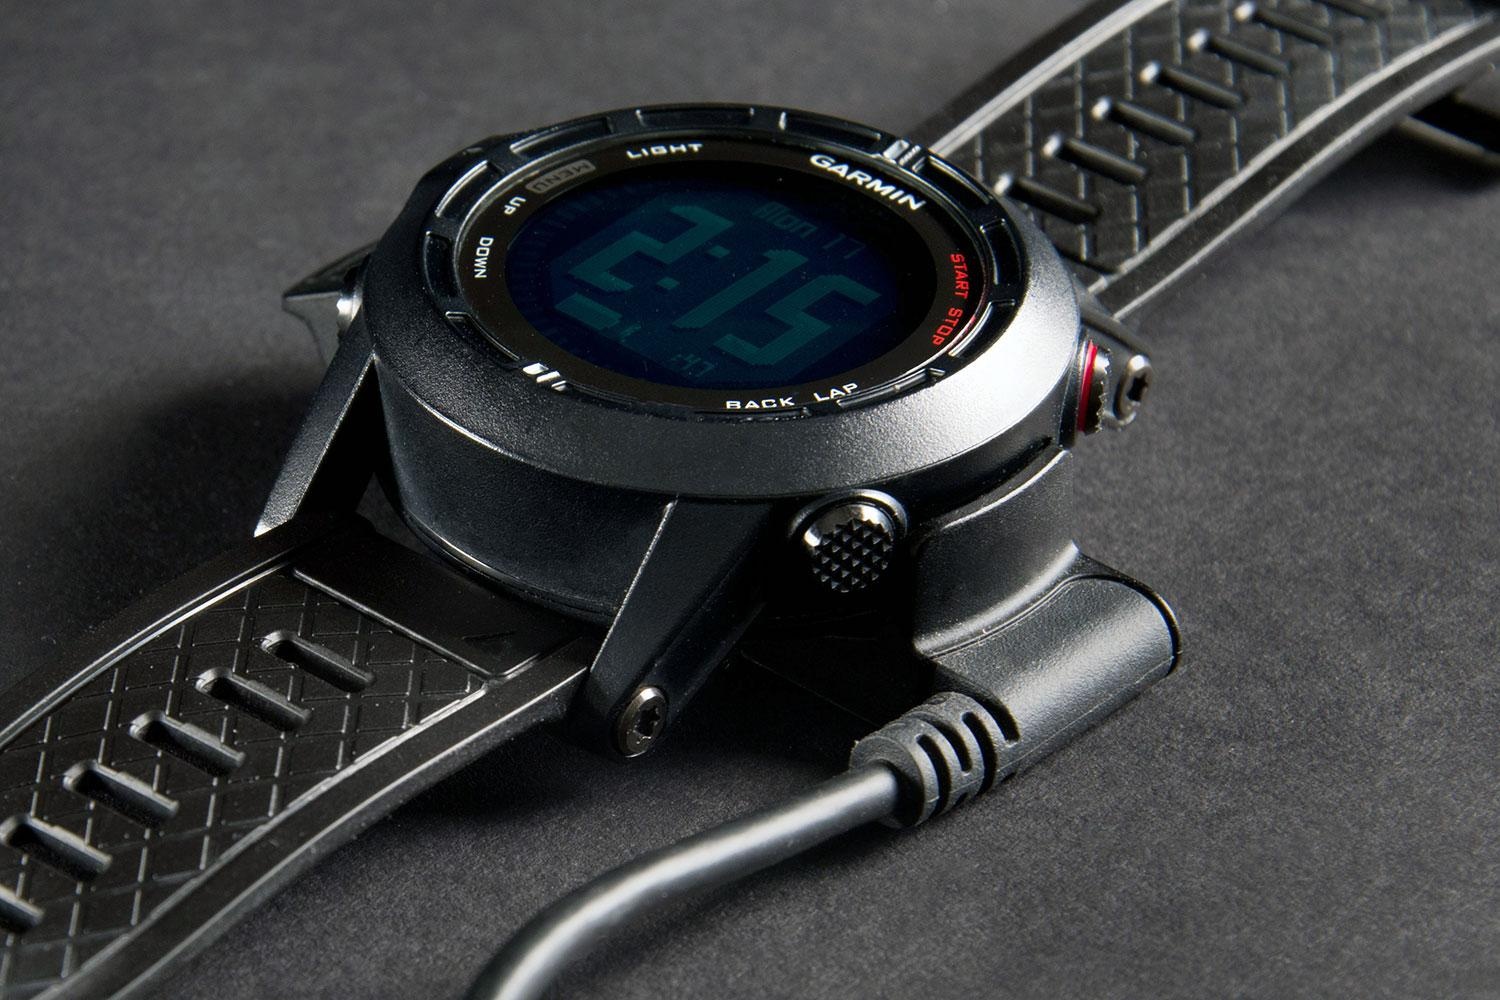 Garmin Fenix 4 expected features and key specs